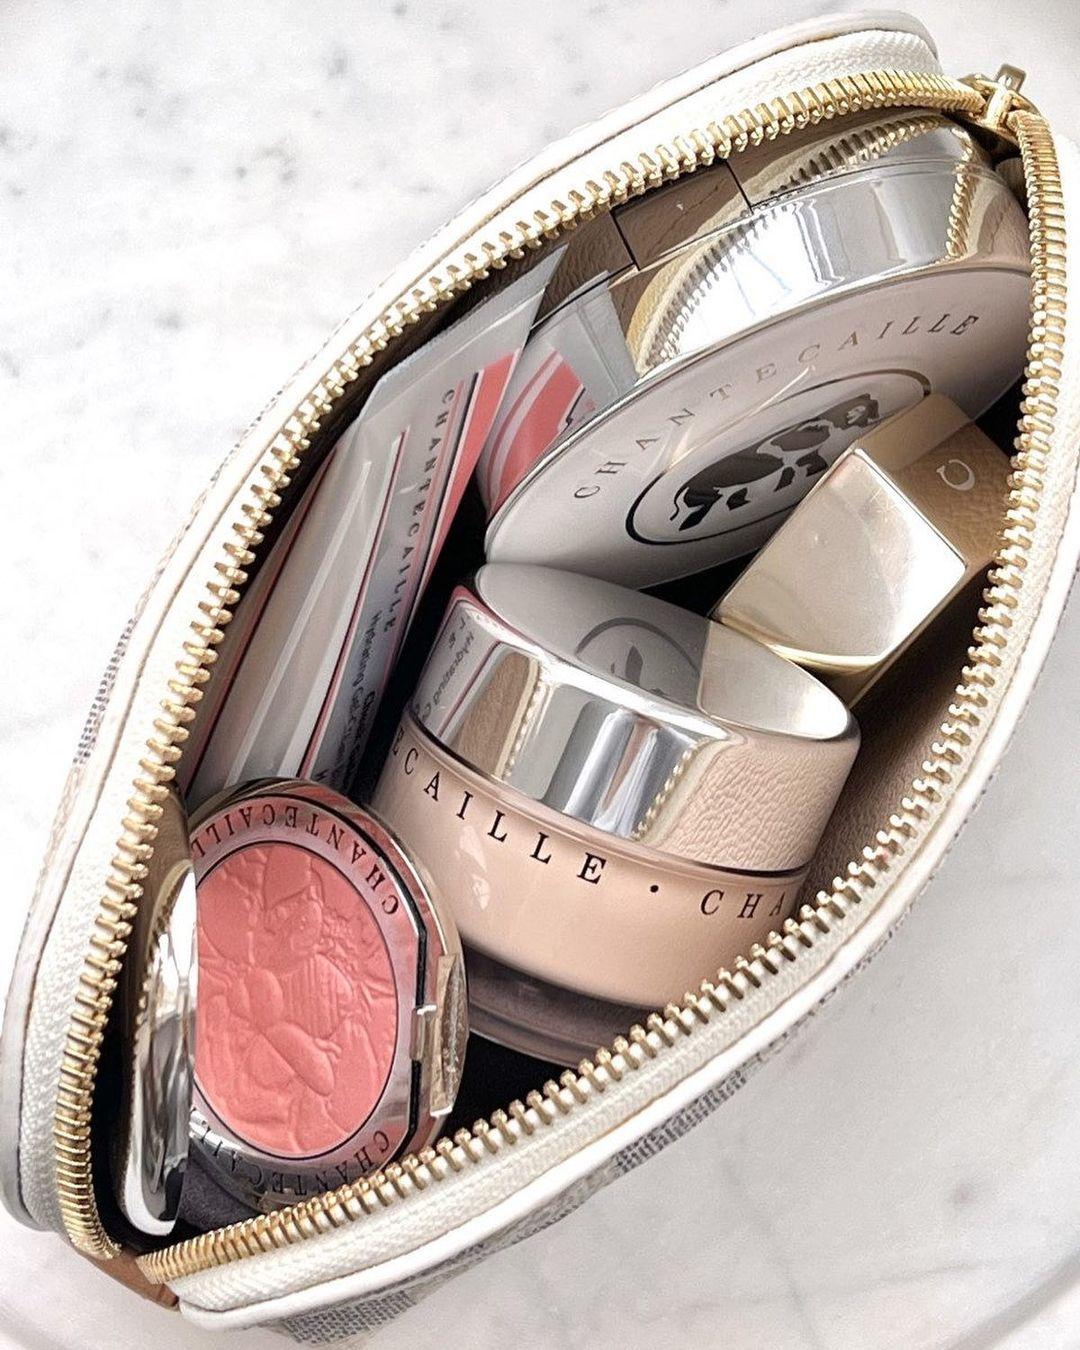 class="content__text"
 What's in @simply.glowe 's makeup bag? A heap of Chantecaille best-sellers! Link in bio to shop. #chantecaille 
 